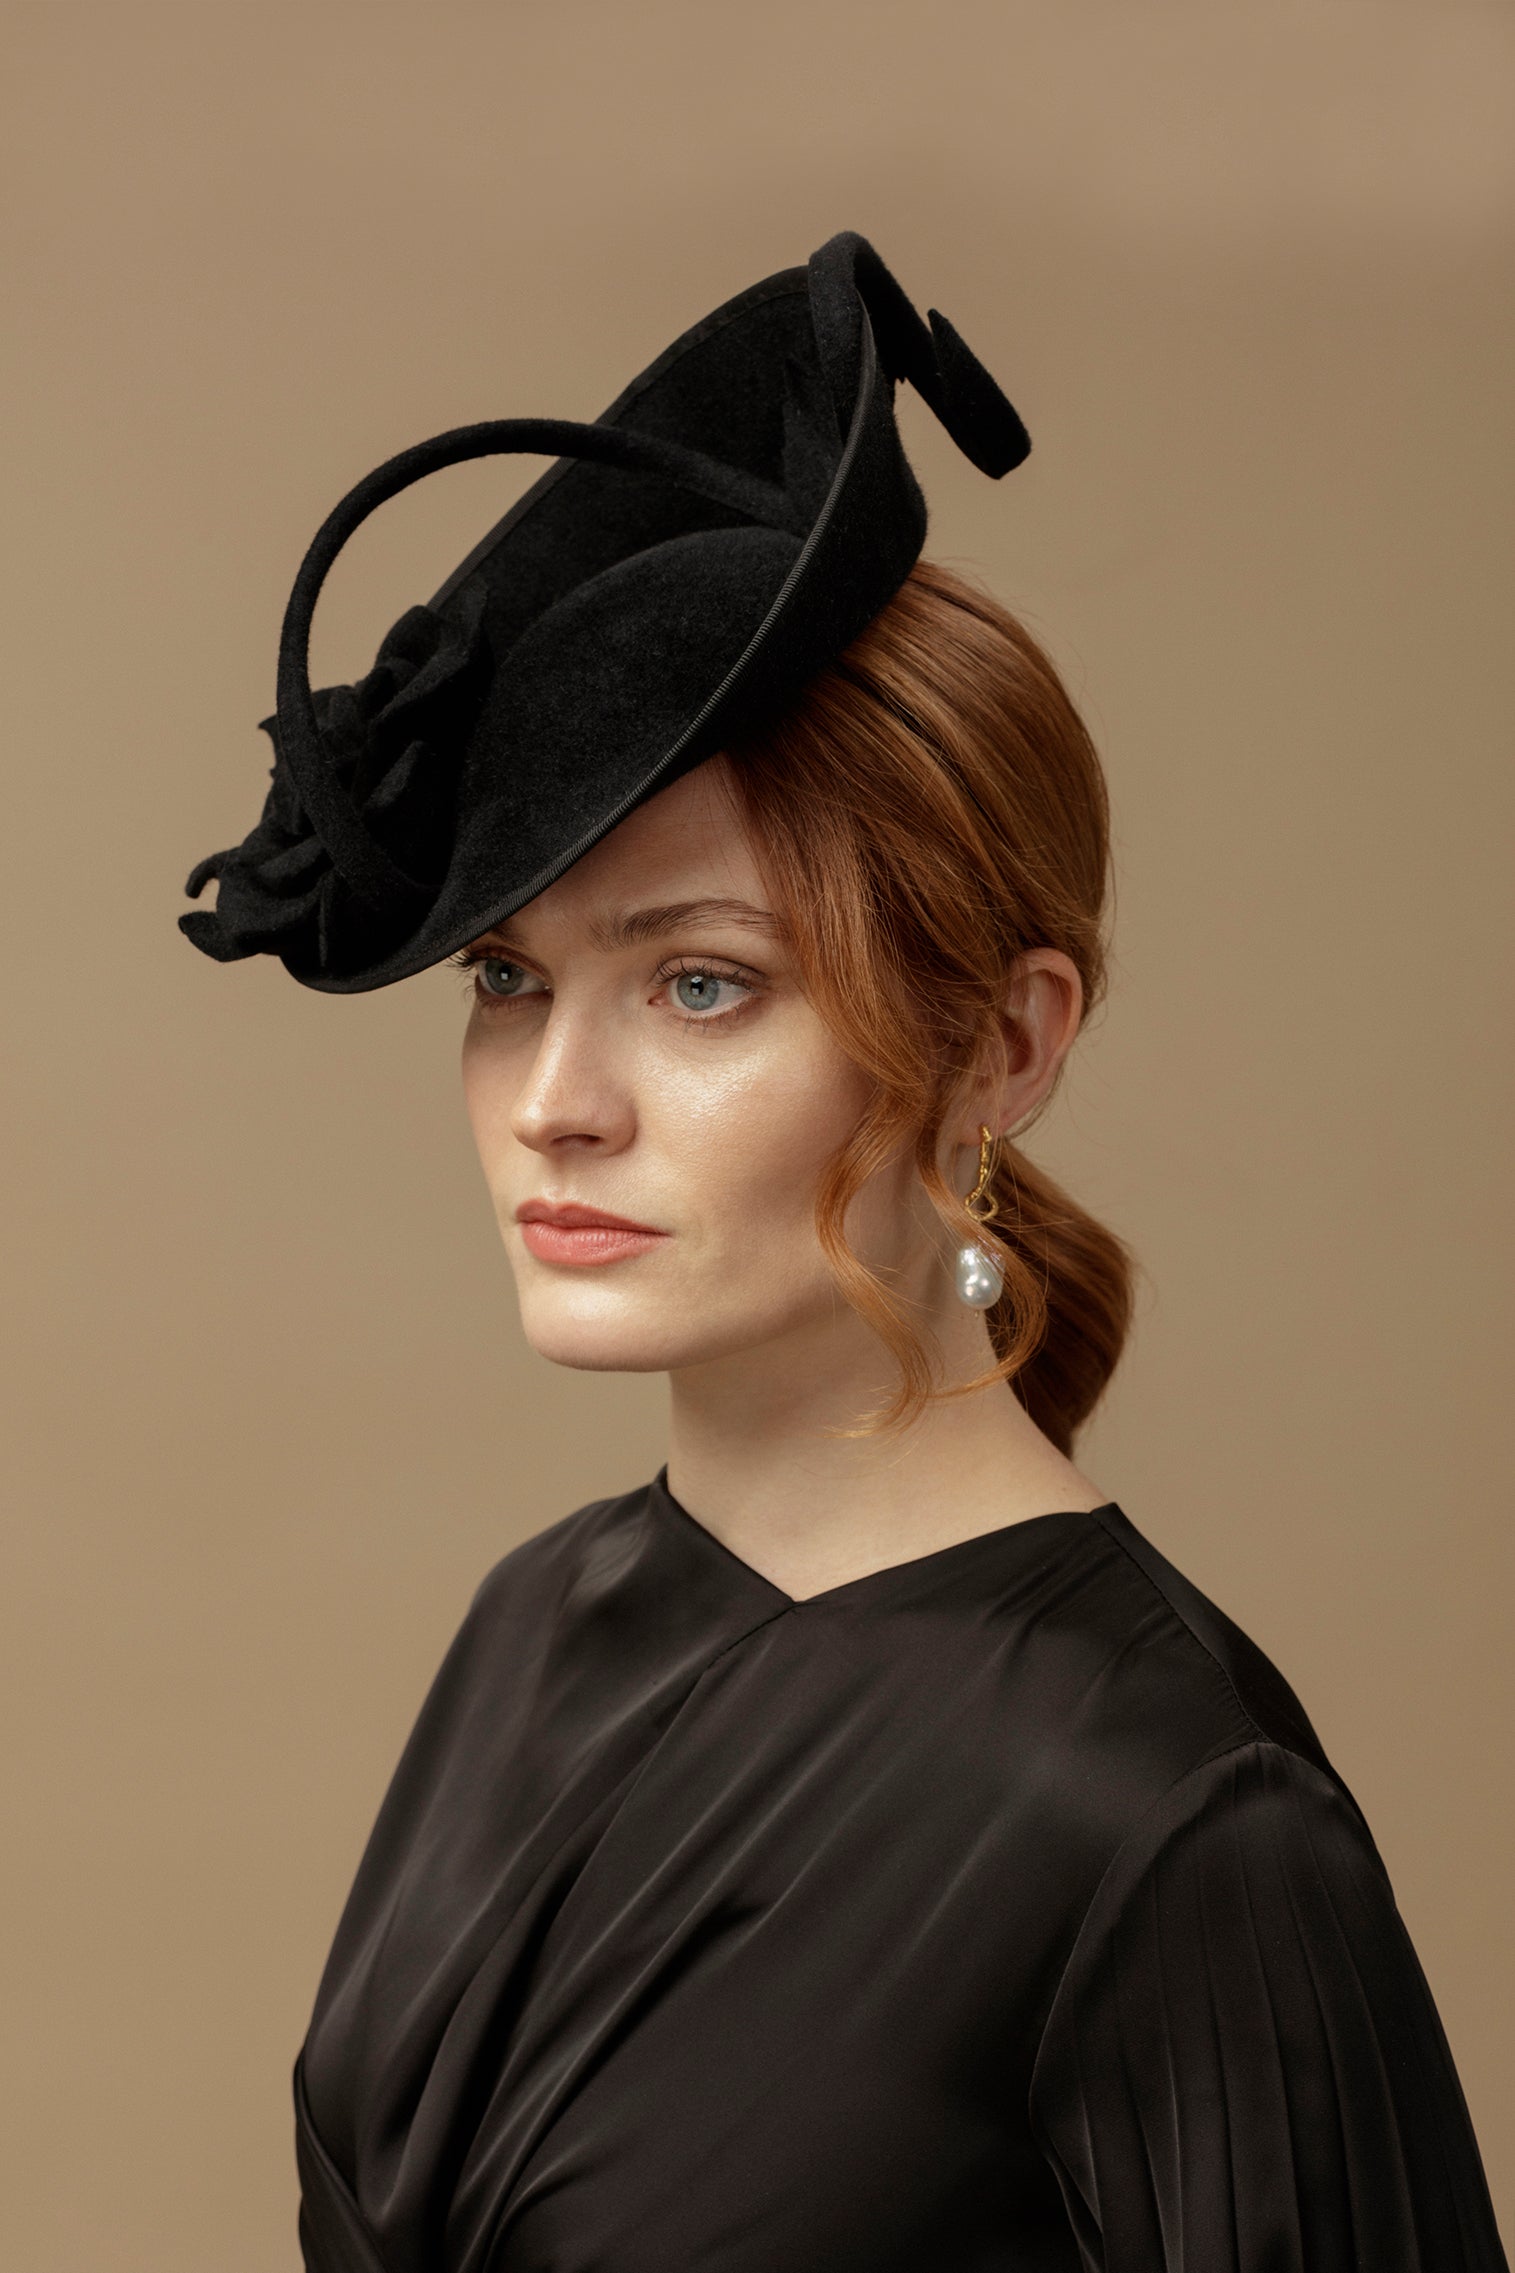 Black Belgravia Rose Hat - Lock Couture by Awon Golding - Lock & Co. Hatters London UK